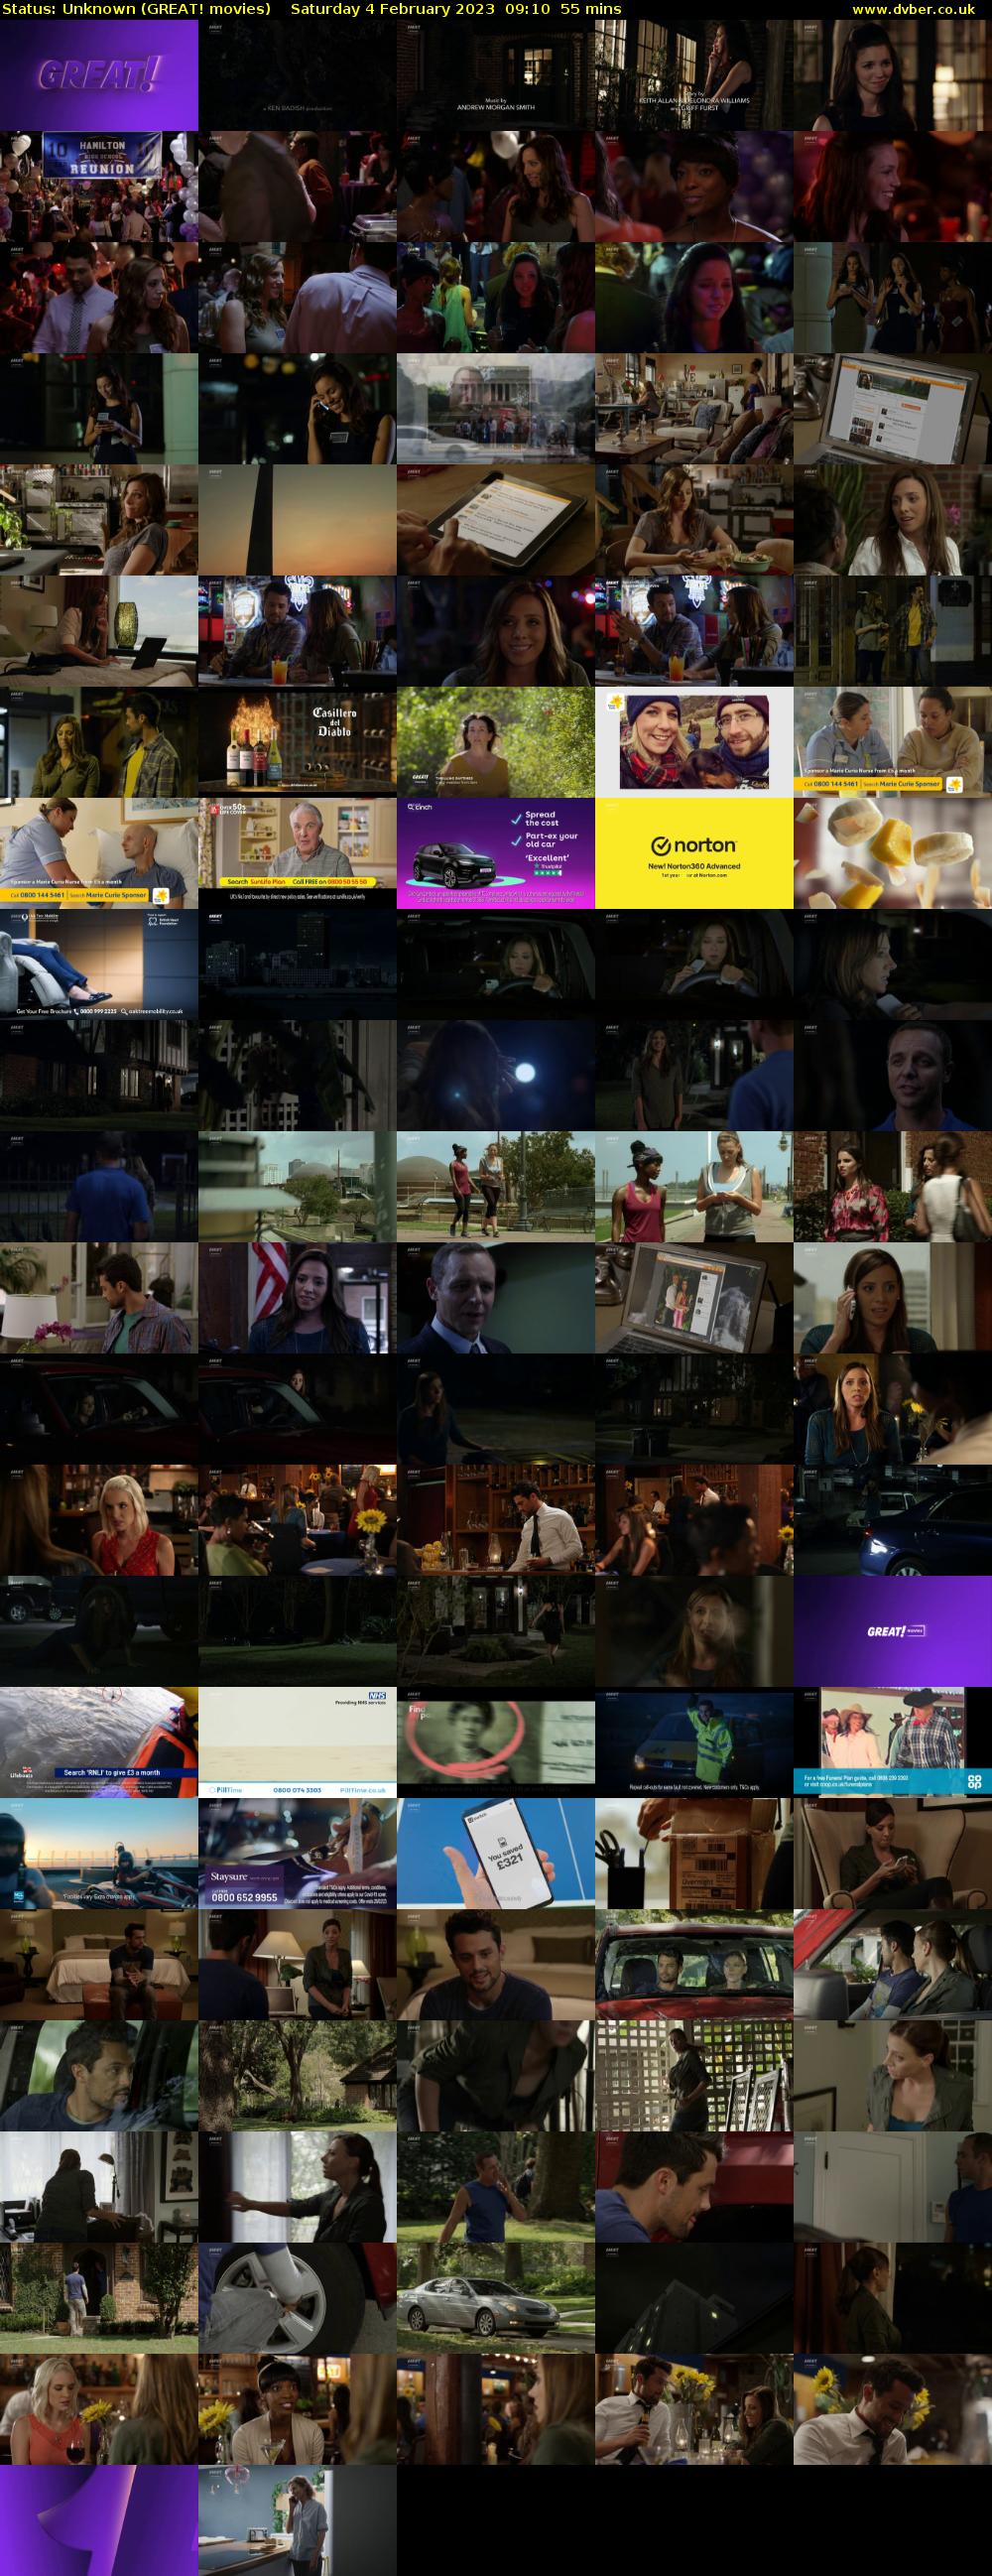 Status: Unknown (GREAT! movies) Saturday 4 February 2023 09:10 - 10:05